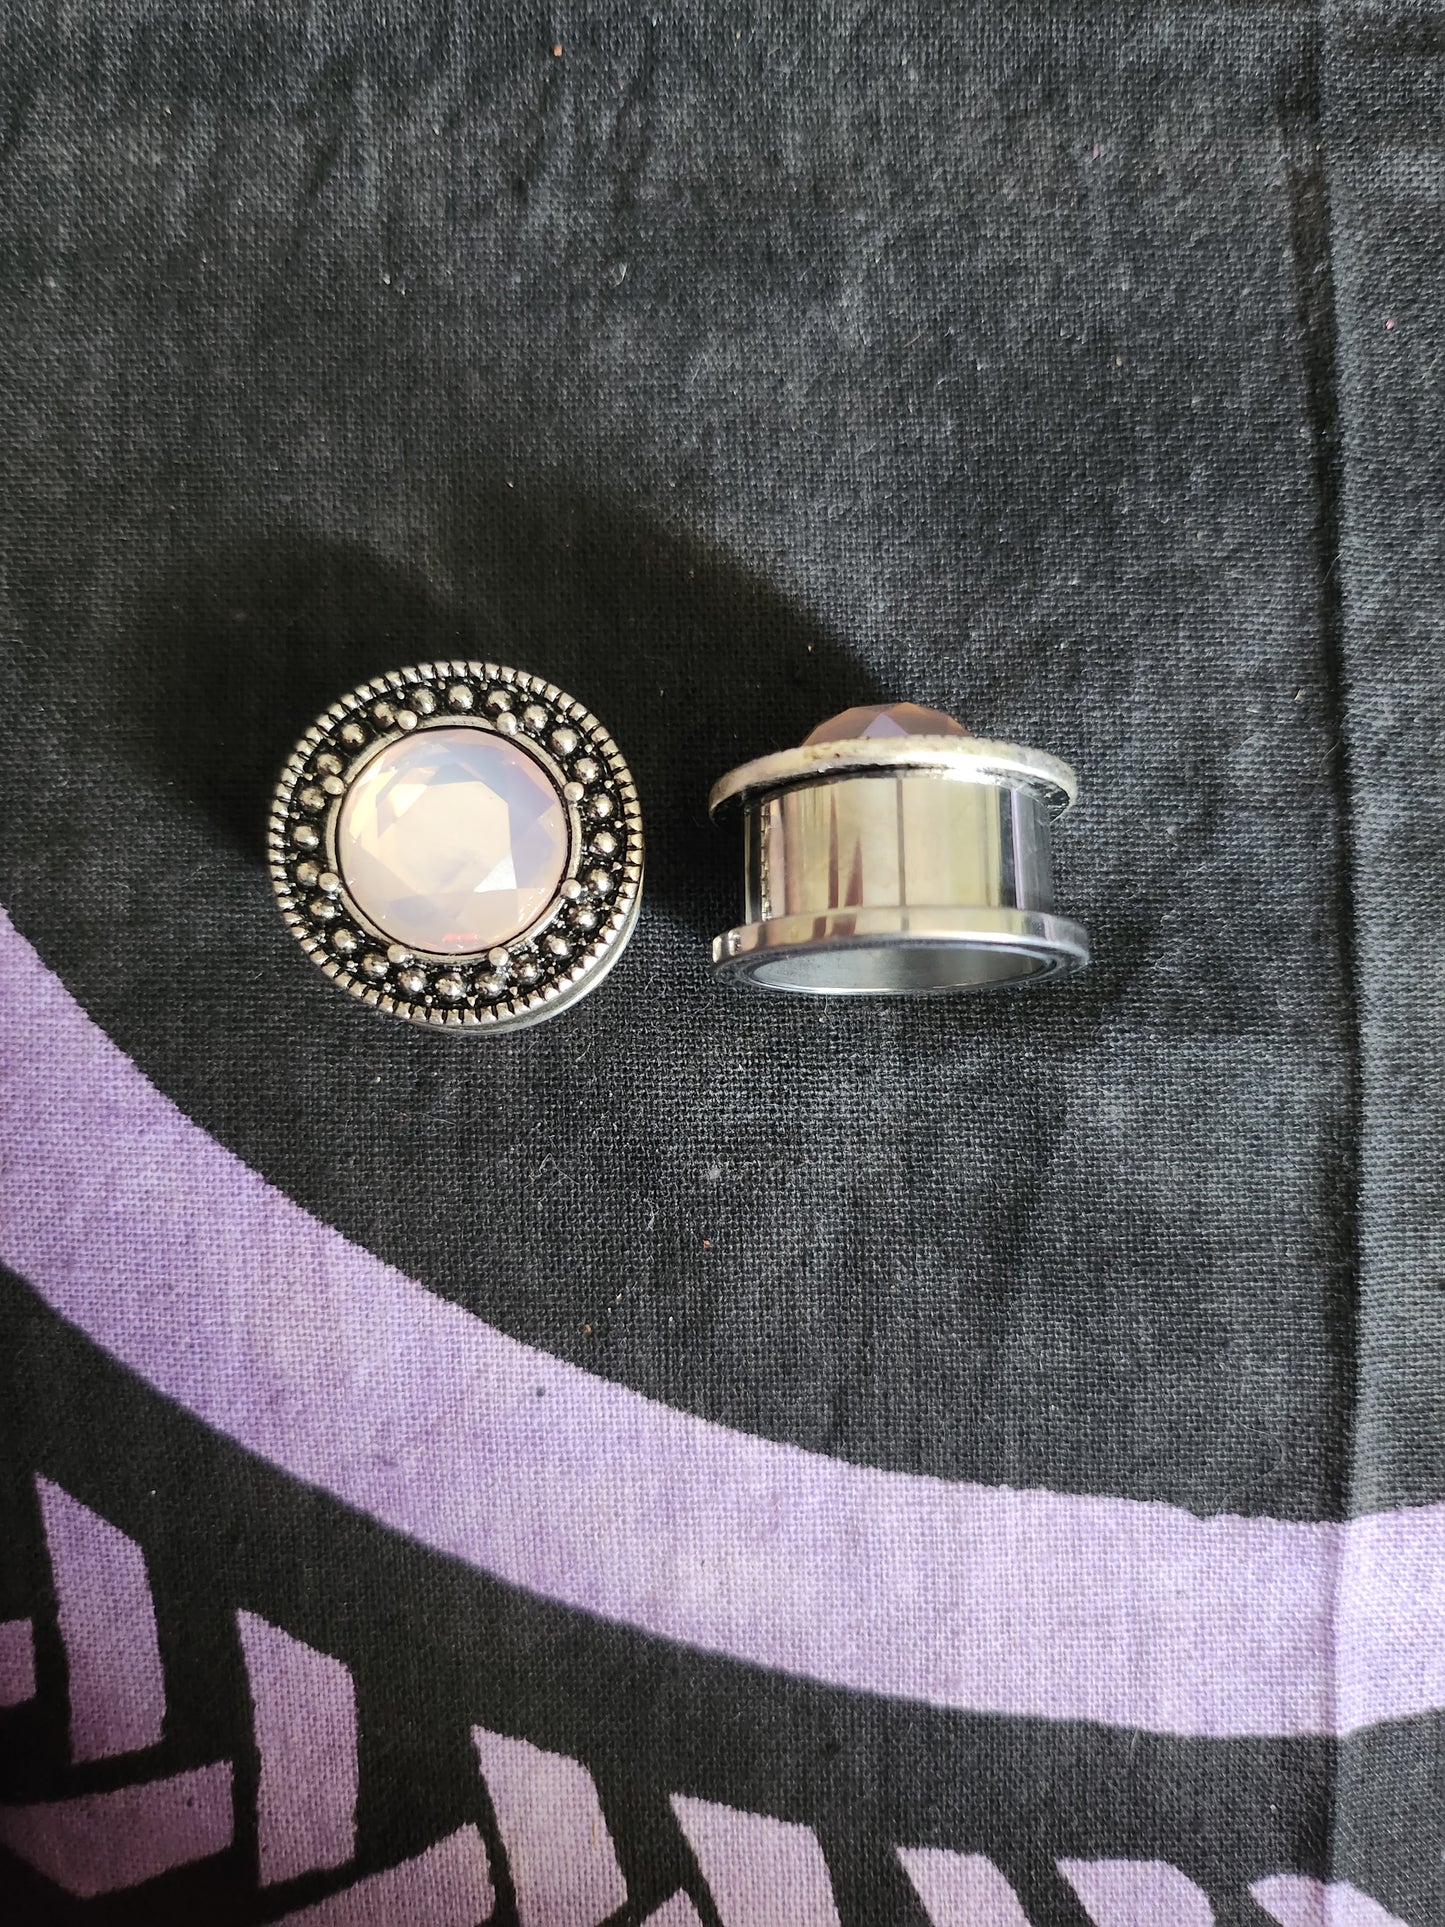 Pink stone centered gage. Pair. 3/4".